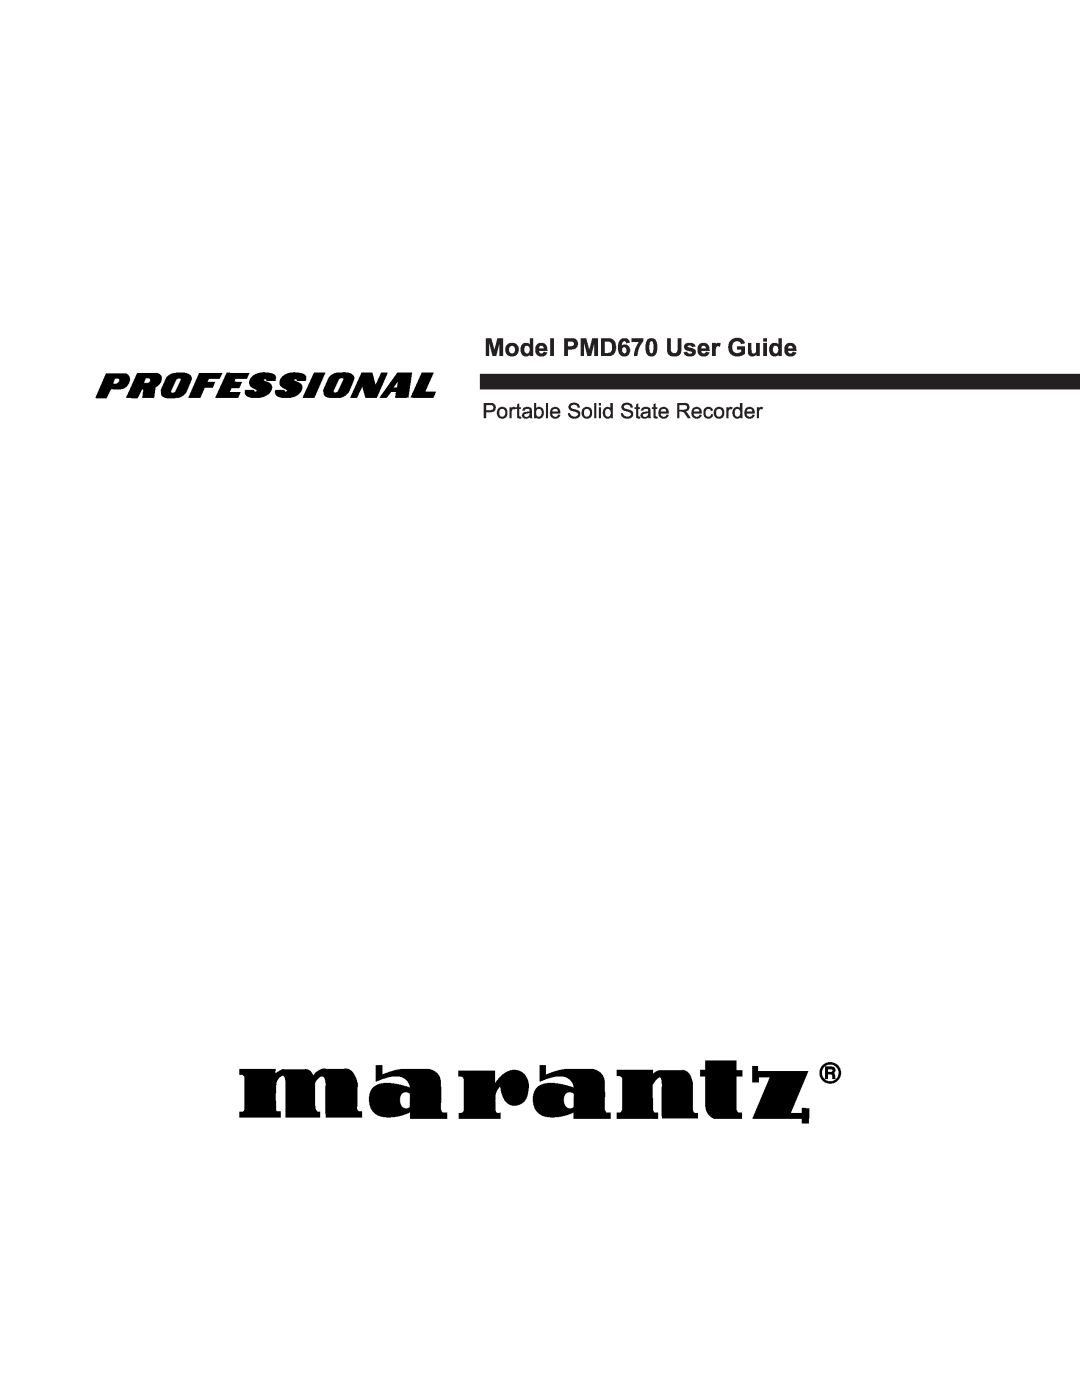 Marantz manual Model PMD670 User Guide, Portable Solid State Recorder 